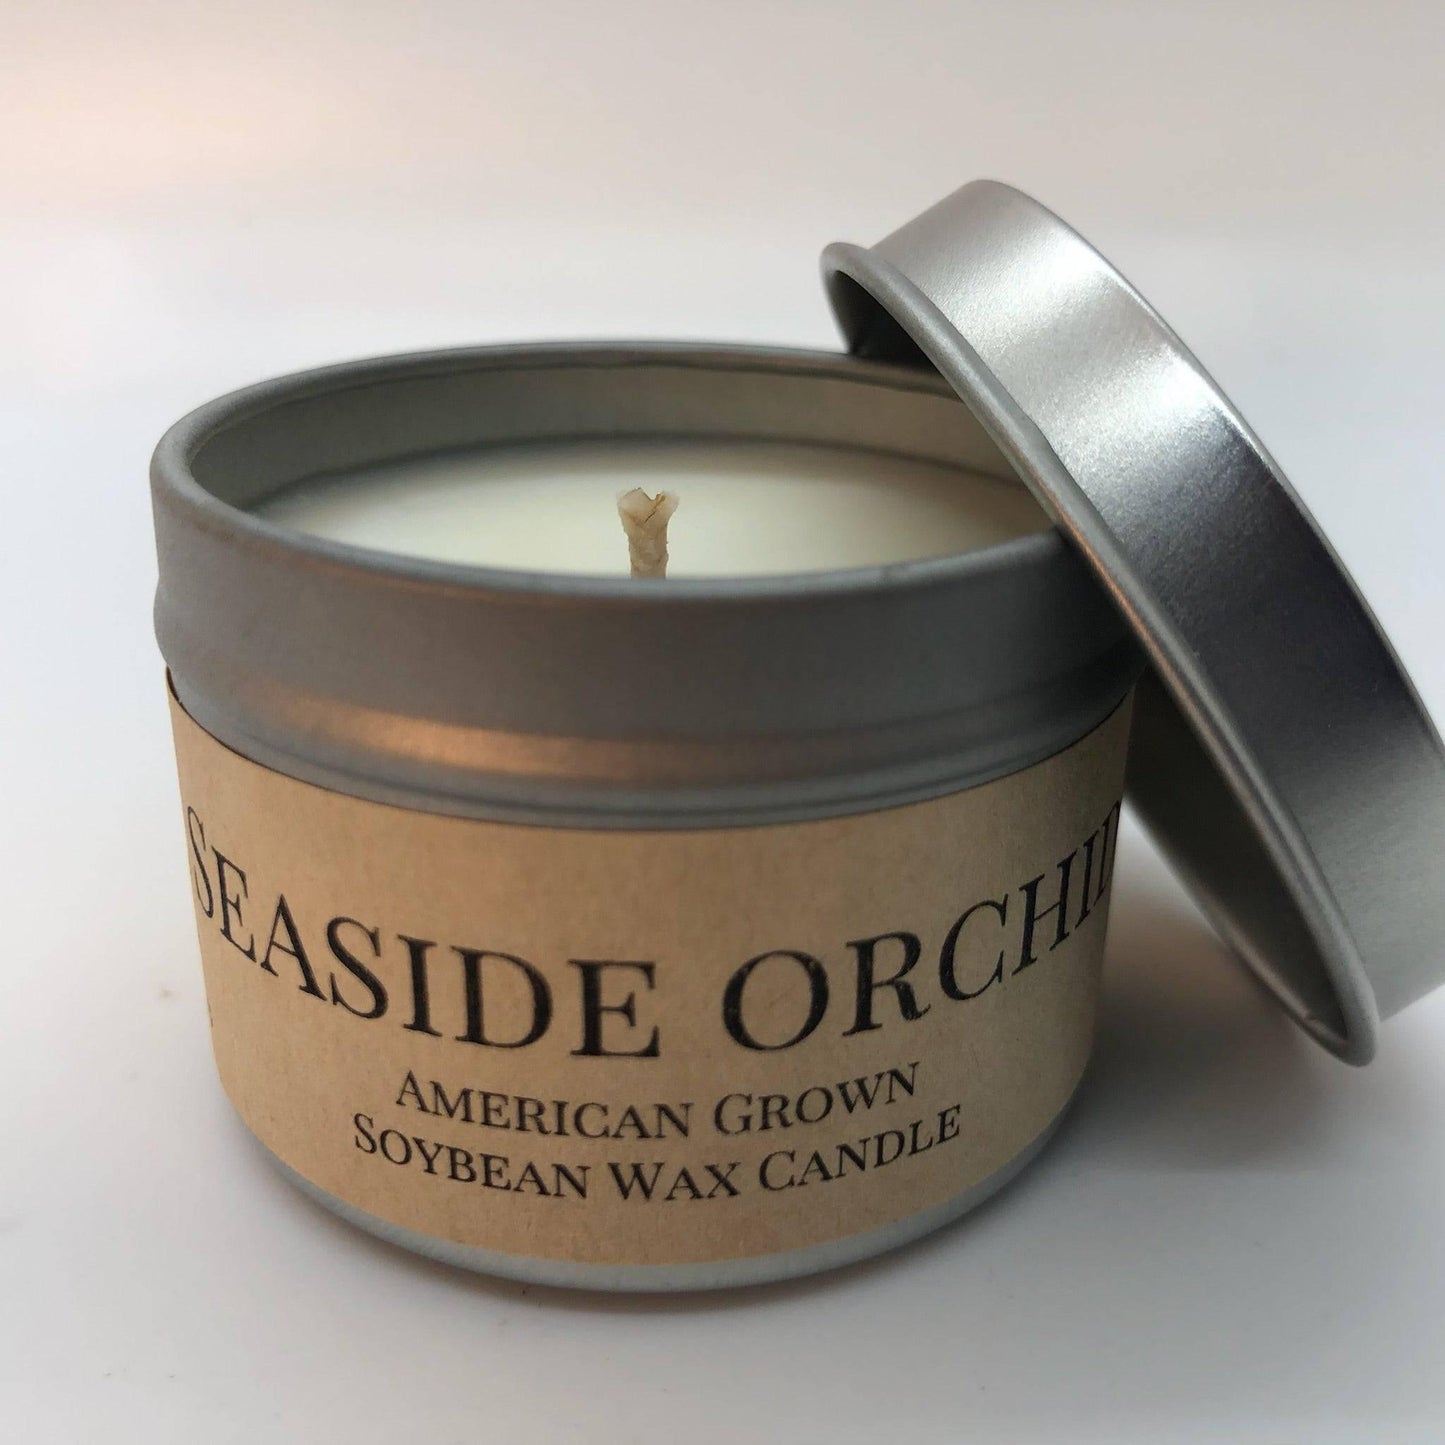 Seaside Orchid Soy Wax Candle | 2 oz Travel Tin - Prairie Fire Candles